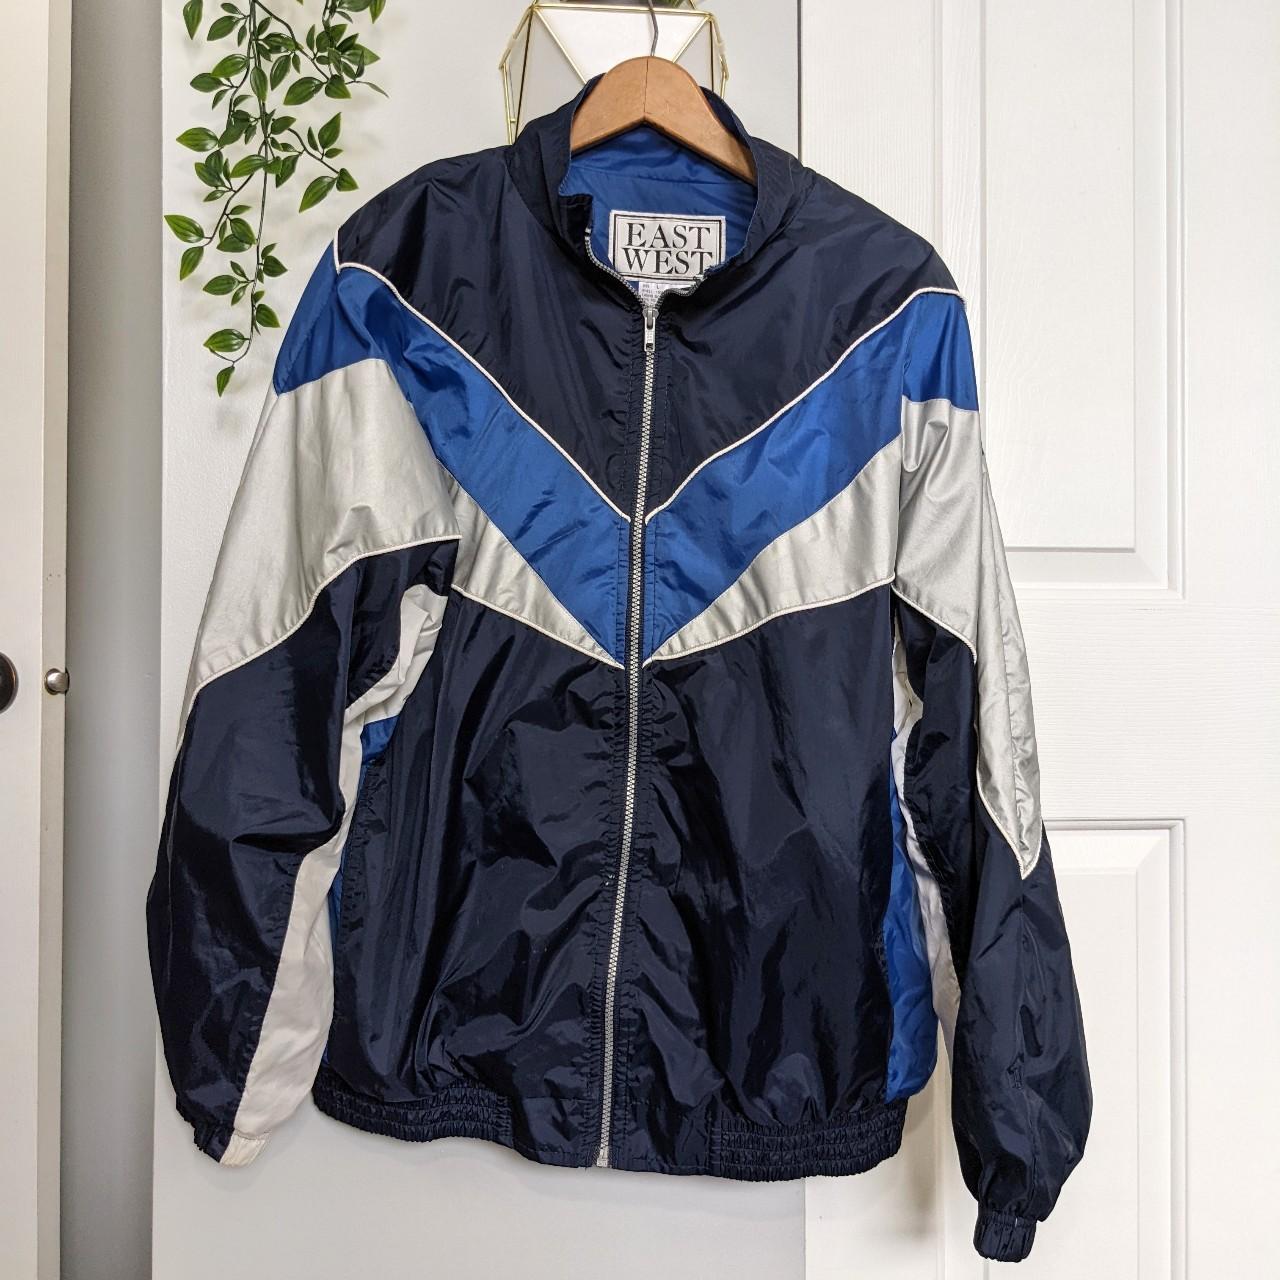 East West Men's Blue and Silver Jacket